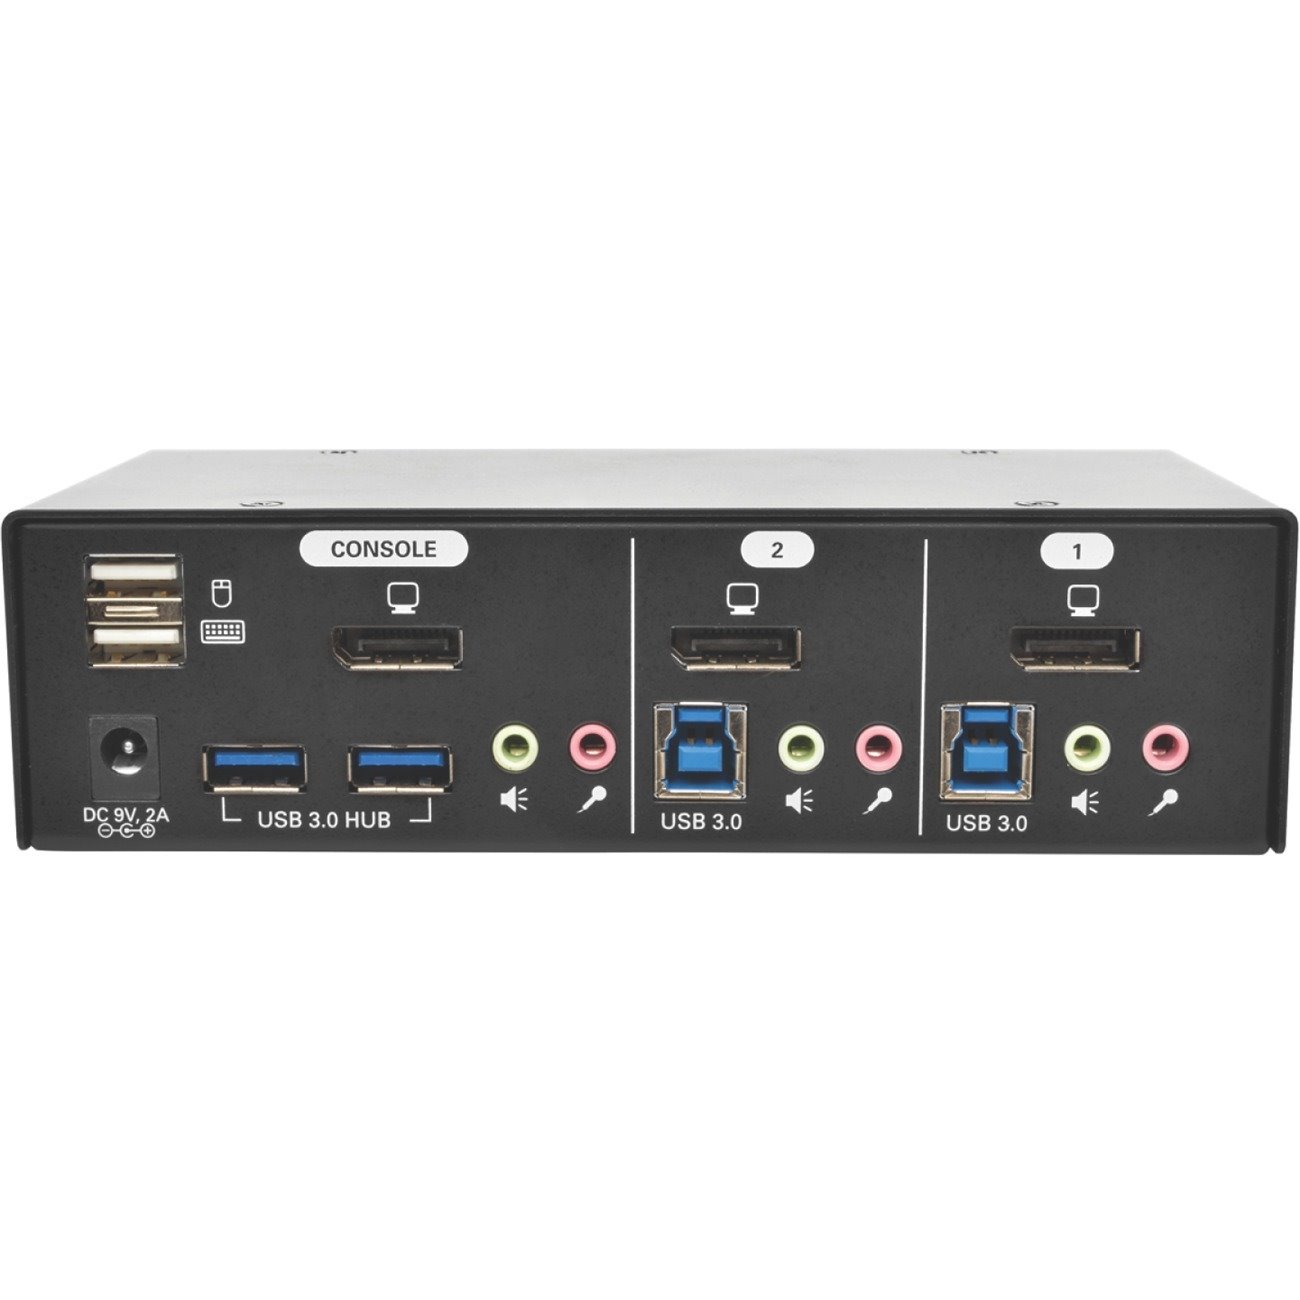 Tripp Lite by Eaton 2-Port DisplayPort KVM Switch with Audio, Cables and USB 3.0 SuperSpeed Hub